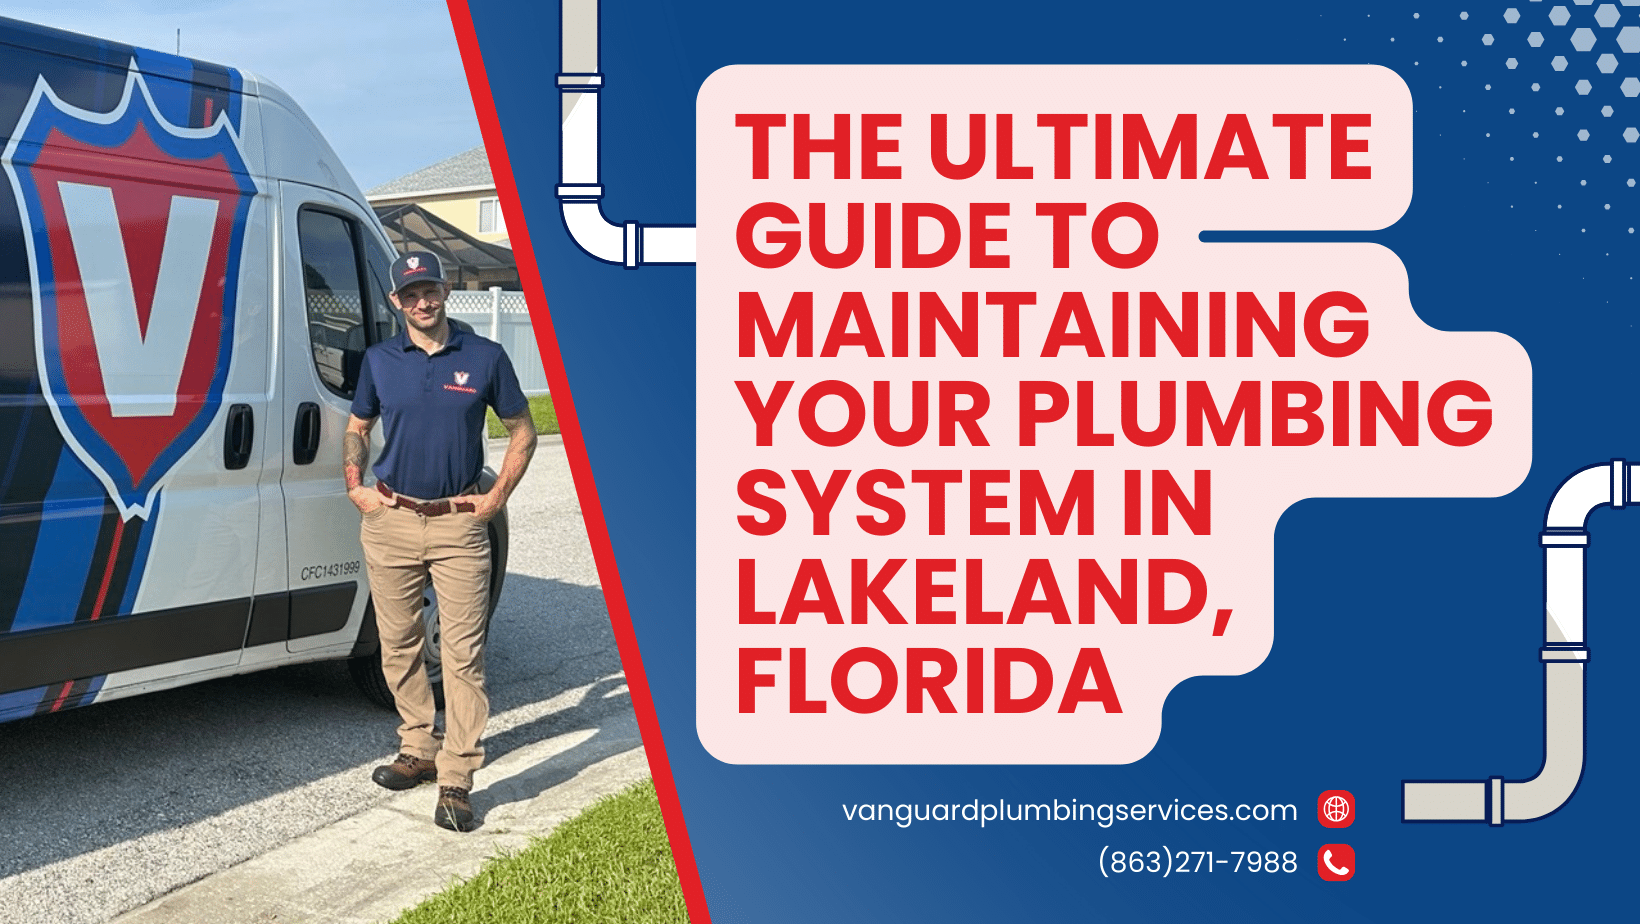 The Ultimate Guide to Maintaining Your Plumbing System in Lakeland, Florida